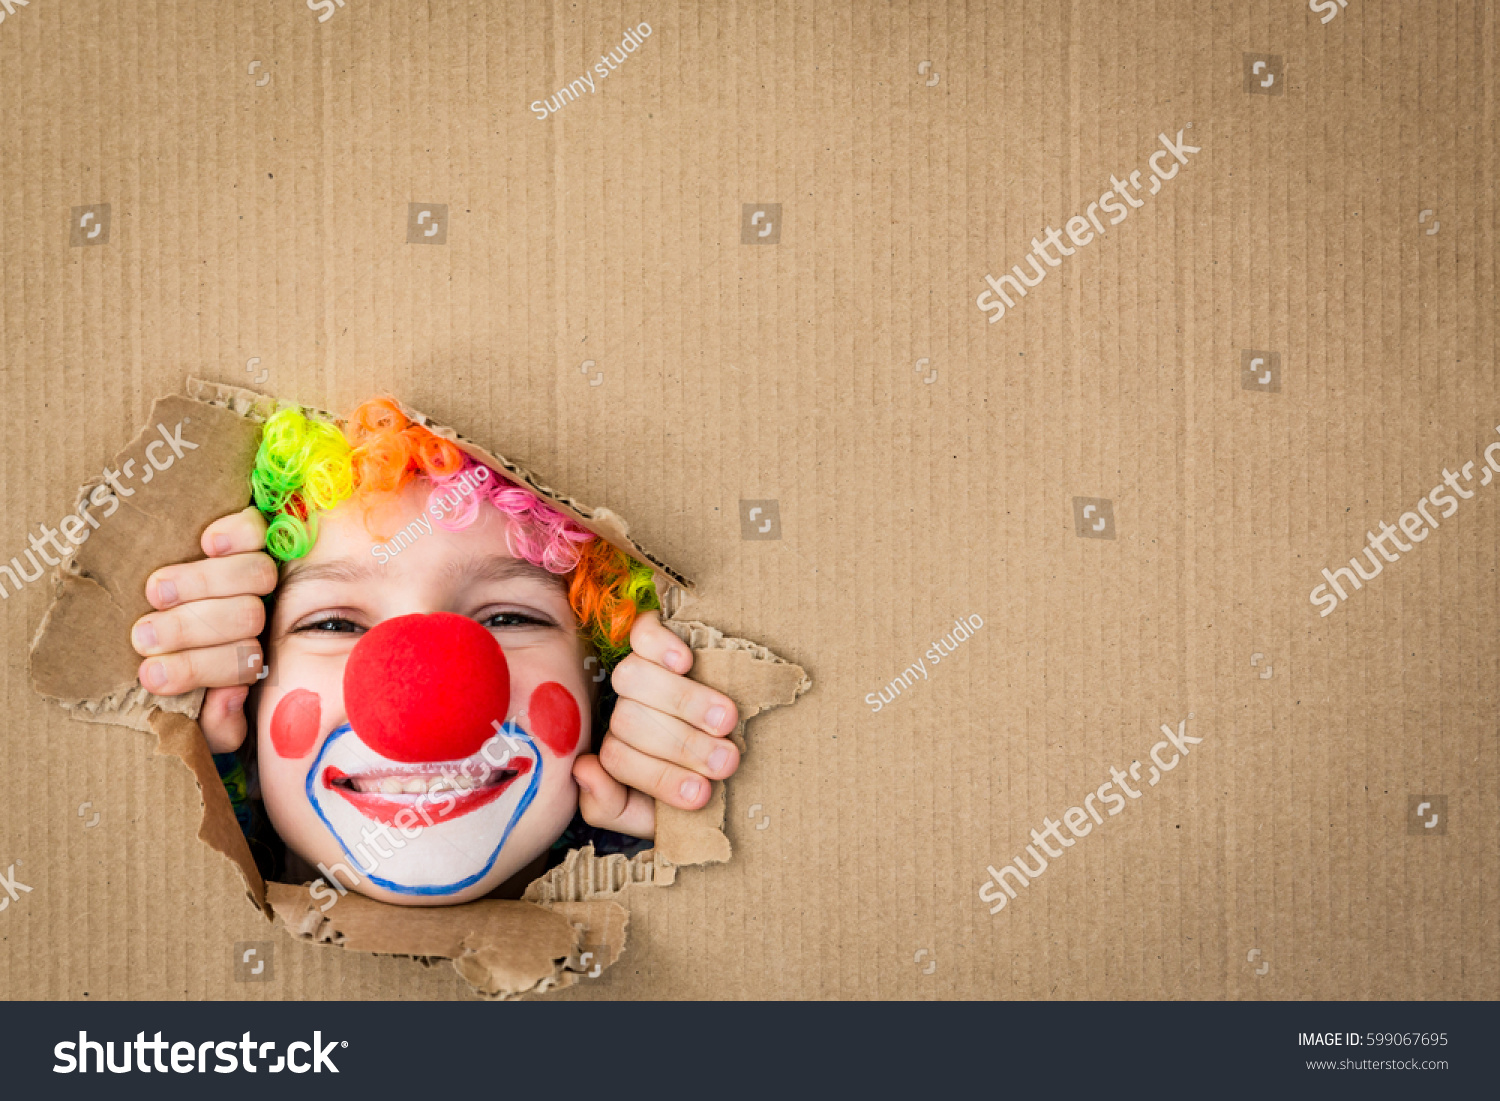 Funny kid clown looking through hole on cardboard. Child playing at home. 1 April Fool's day concept. Copy space. #599067695